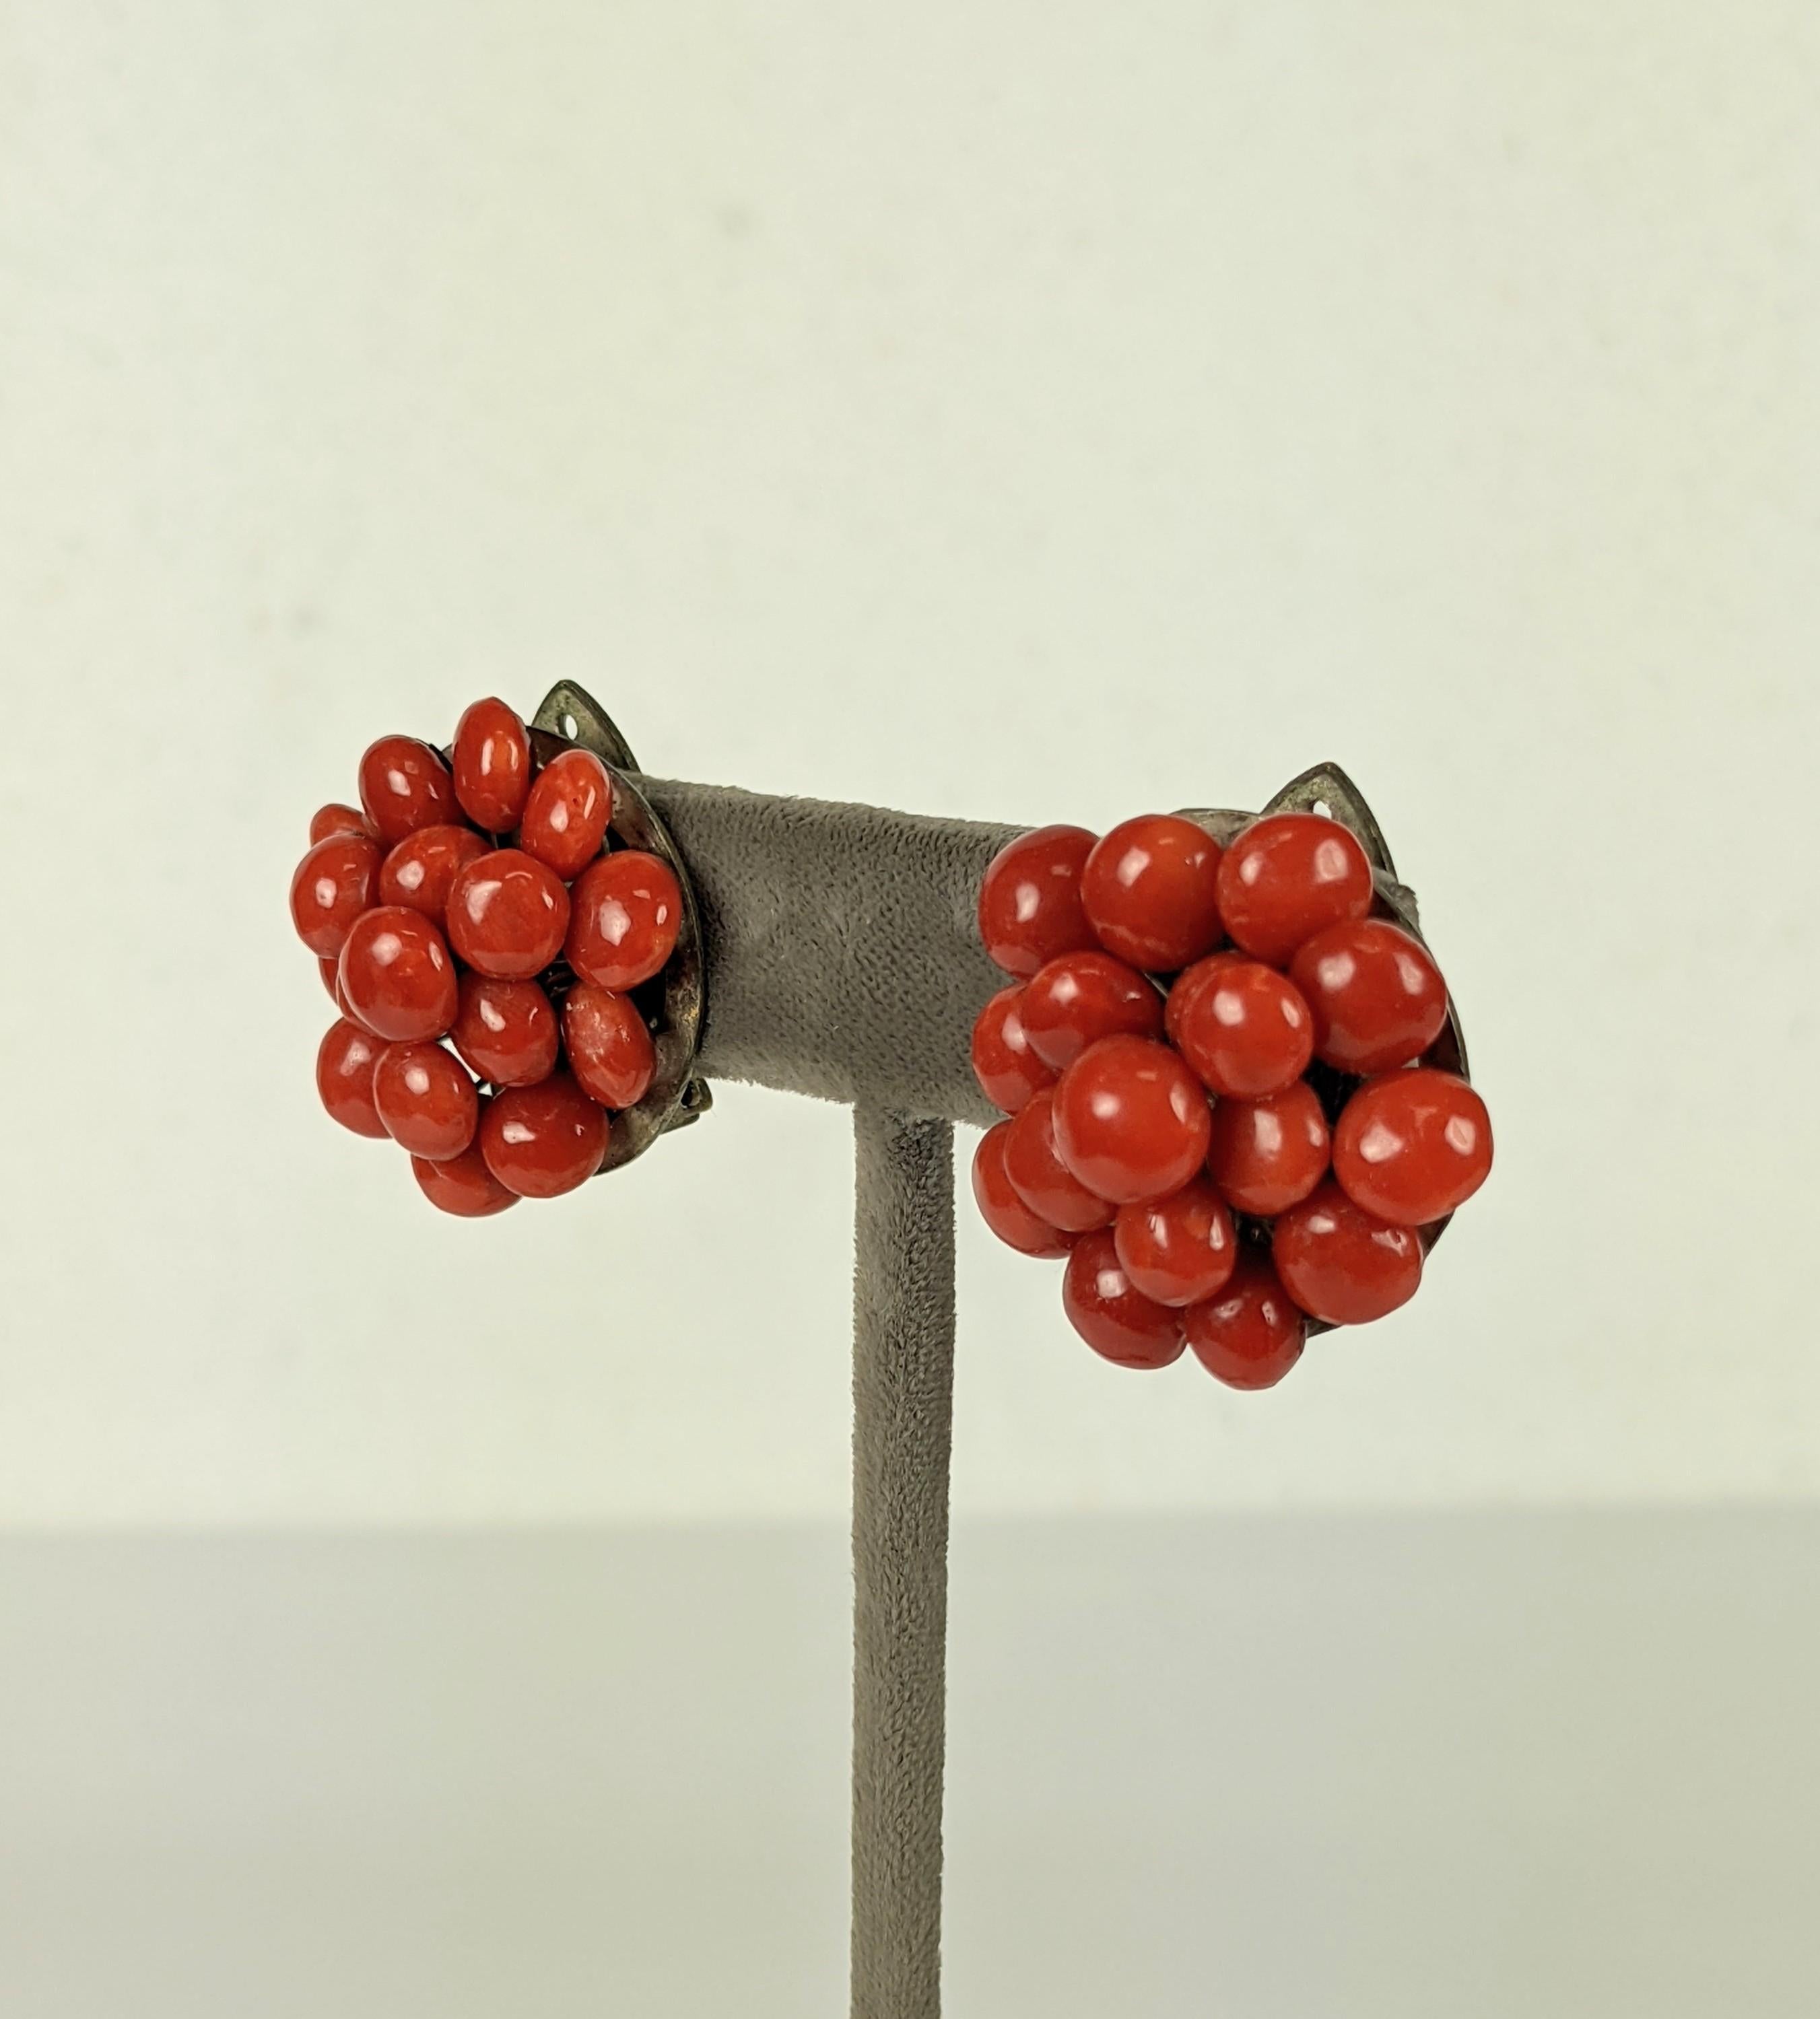 Italian red coral clips composed of button like tablets.  Fashioned of two concentric layers of the coral tablets with a larger coral button in the center. Set on gilt metal wire frame. Can be worn as ear clips or dress clips.
1930'S Italy.